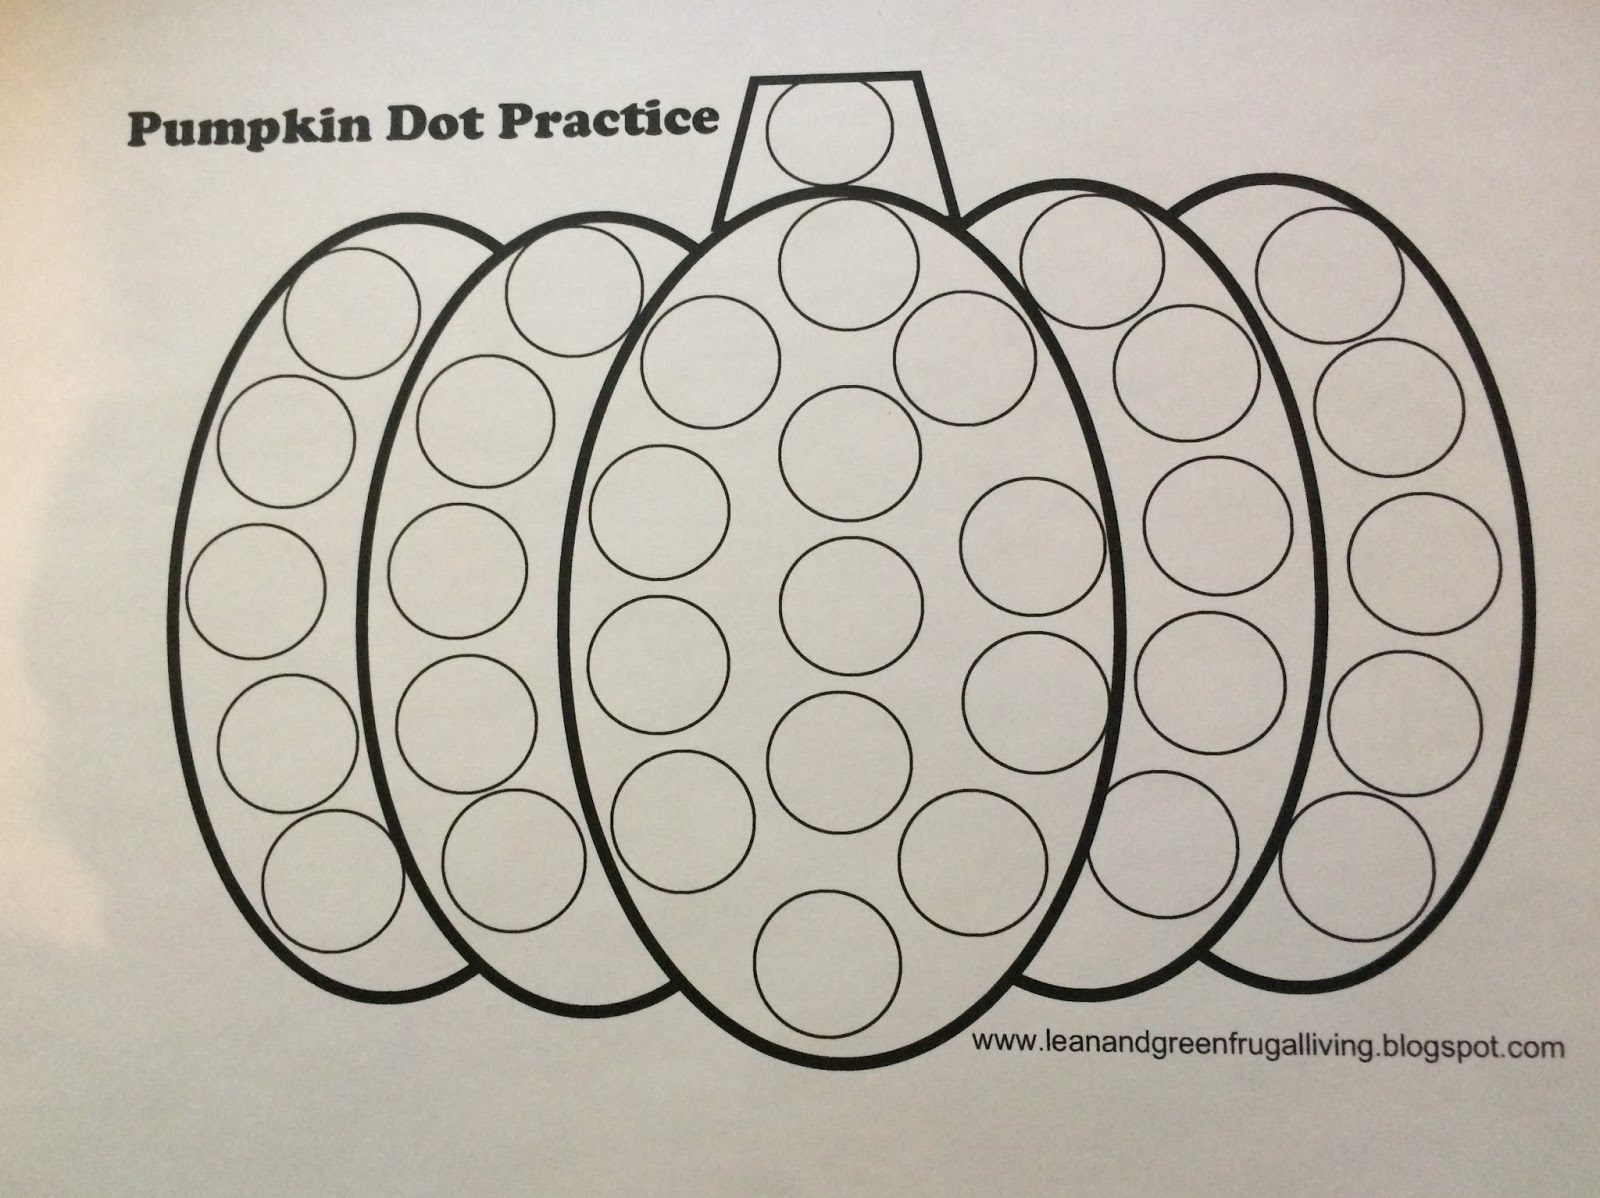 Lean and Green Frugal Living: Free Printable! Pumpkin Dot Practice